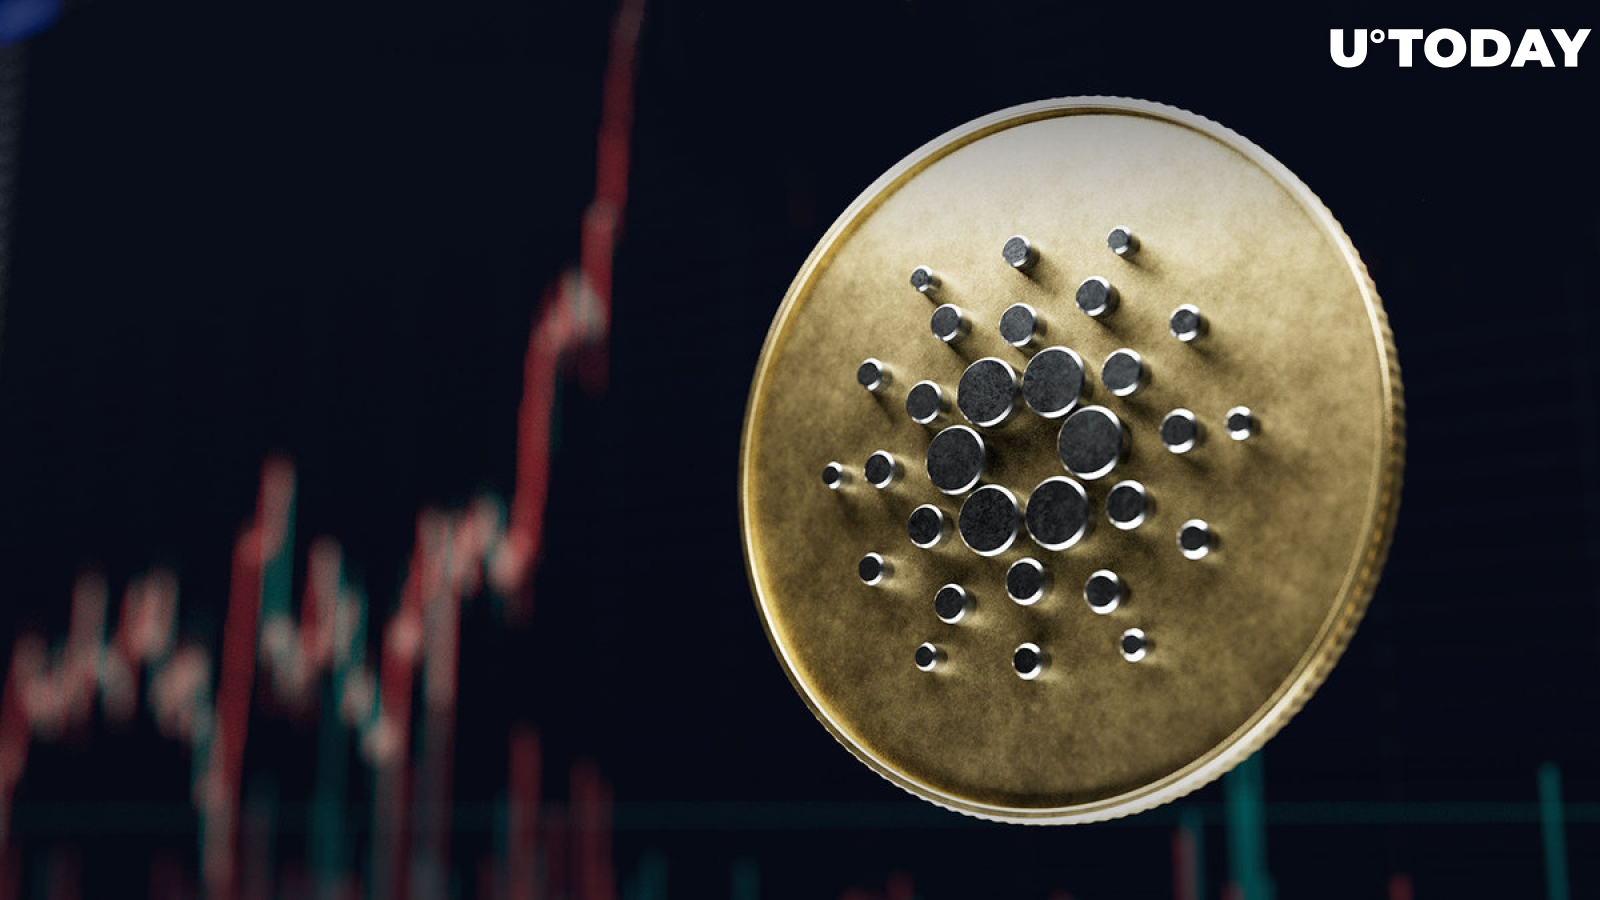 Cardano Network Transactions Record 75% Increase as Activity Skyrockets: Details